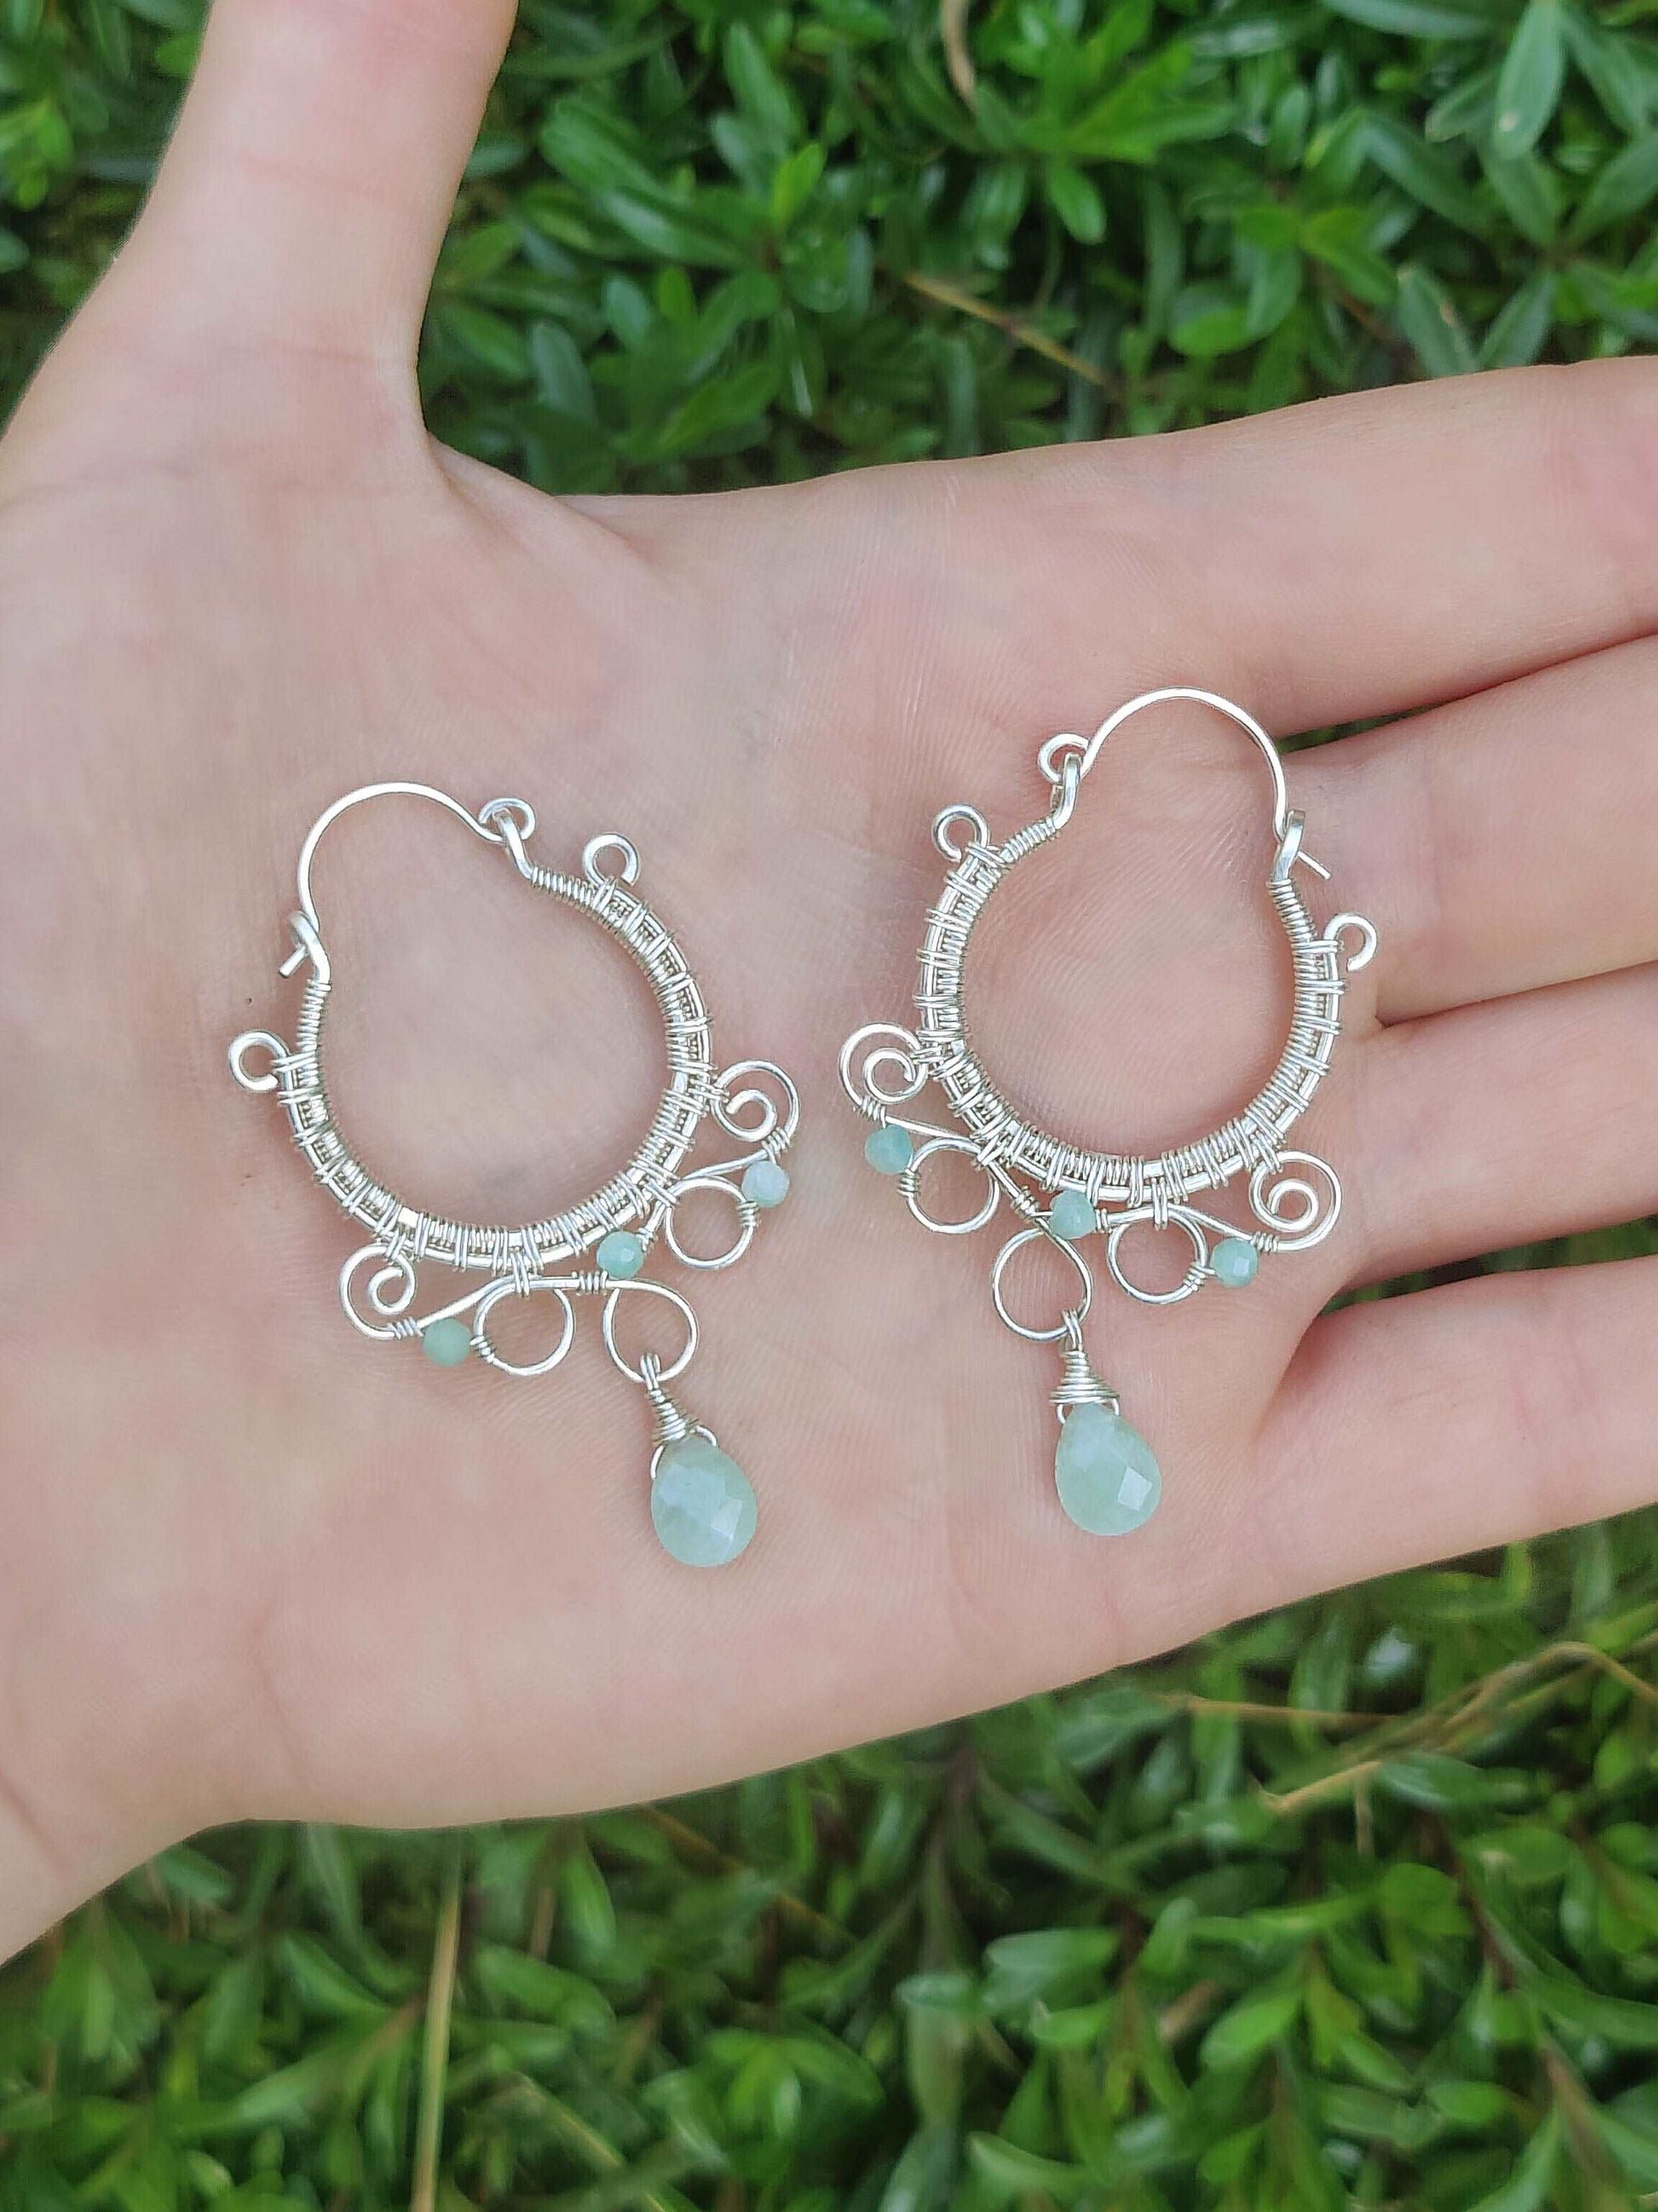 Wire wrapped silver hoop earrings. Designed with intricate swirls, woven frame and amazonite crystal dangles. 